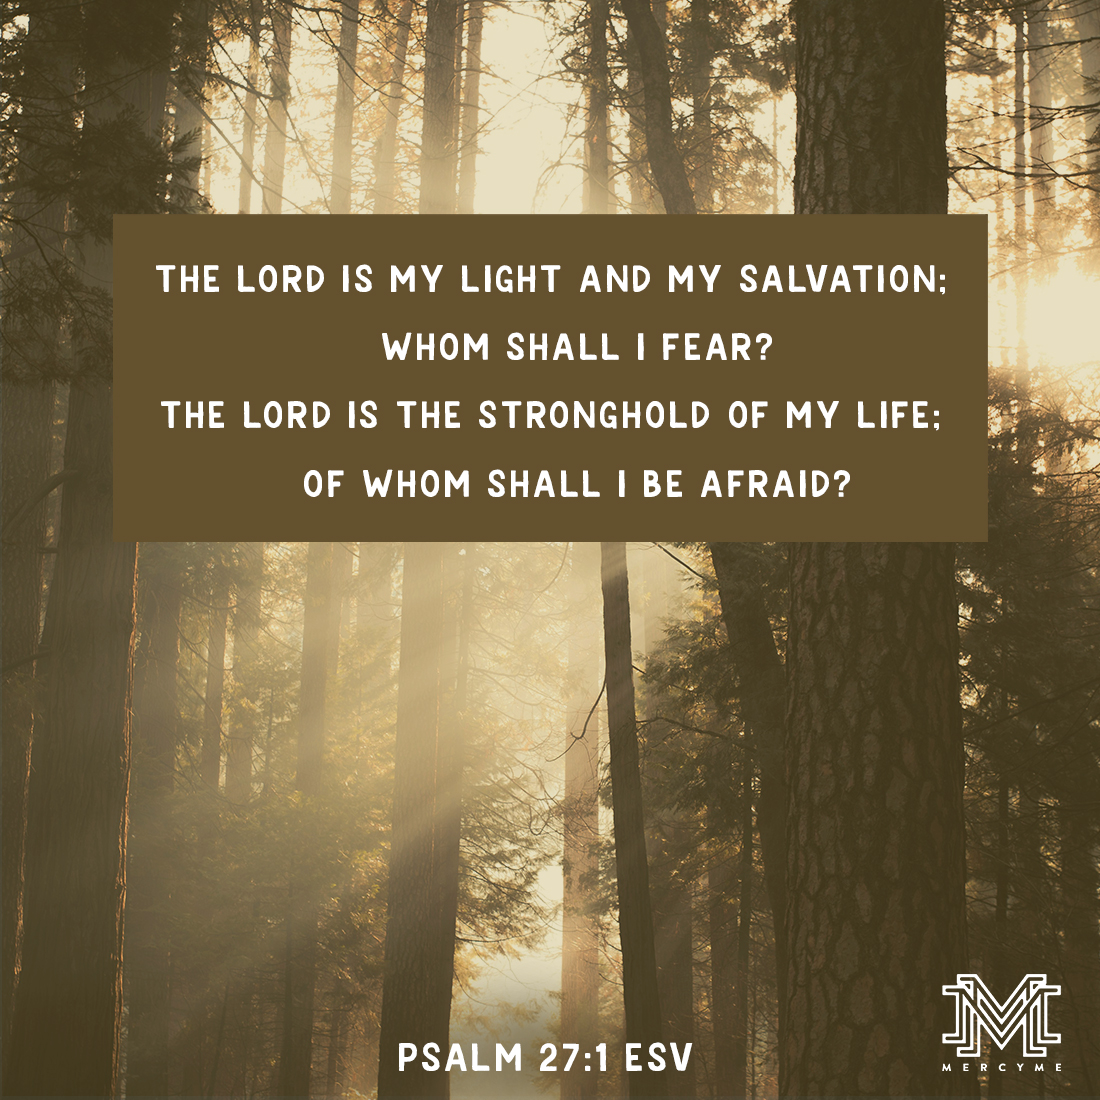 The Lord is my light and my salvation; whom shall I fear? The Lord is the stronghold of my life; of whom shall I be afraid? Psalm 27:1 ESV

#alwaysonlyjesus #hope #faith #grace #jesus #godsword #scripture #godslove #mercyme #inspiration #encouragement